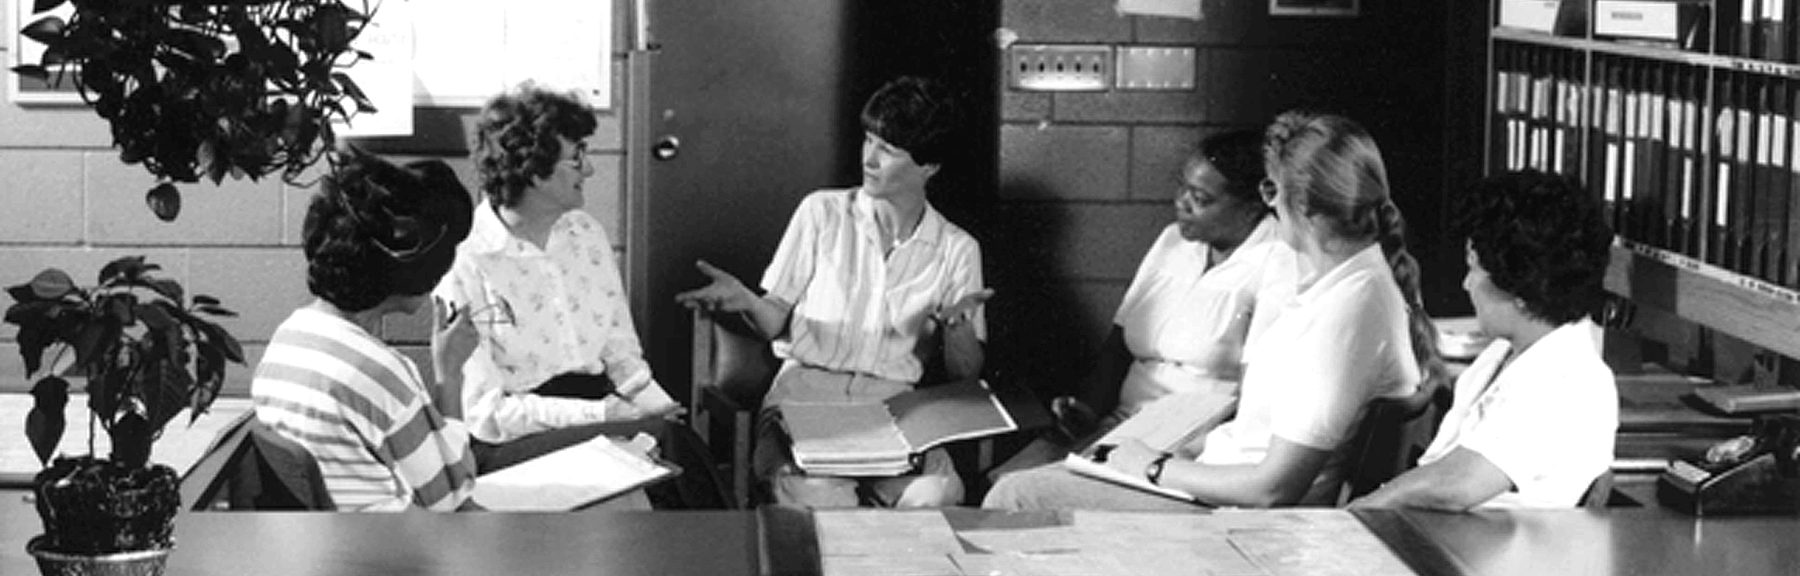 1970s black and white photograph of group of office workers or professional having a meeting or discussion in office setting